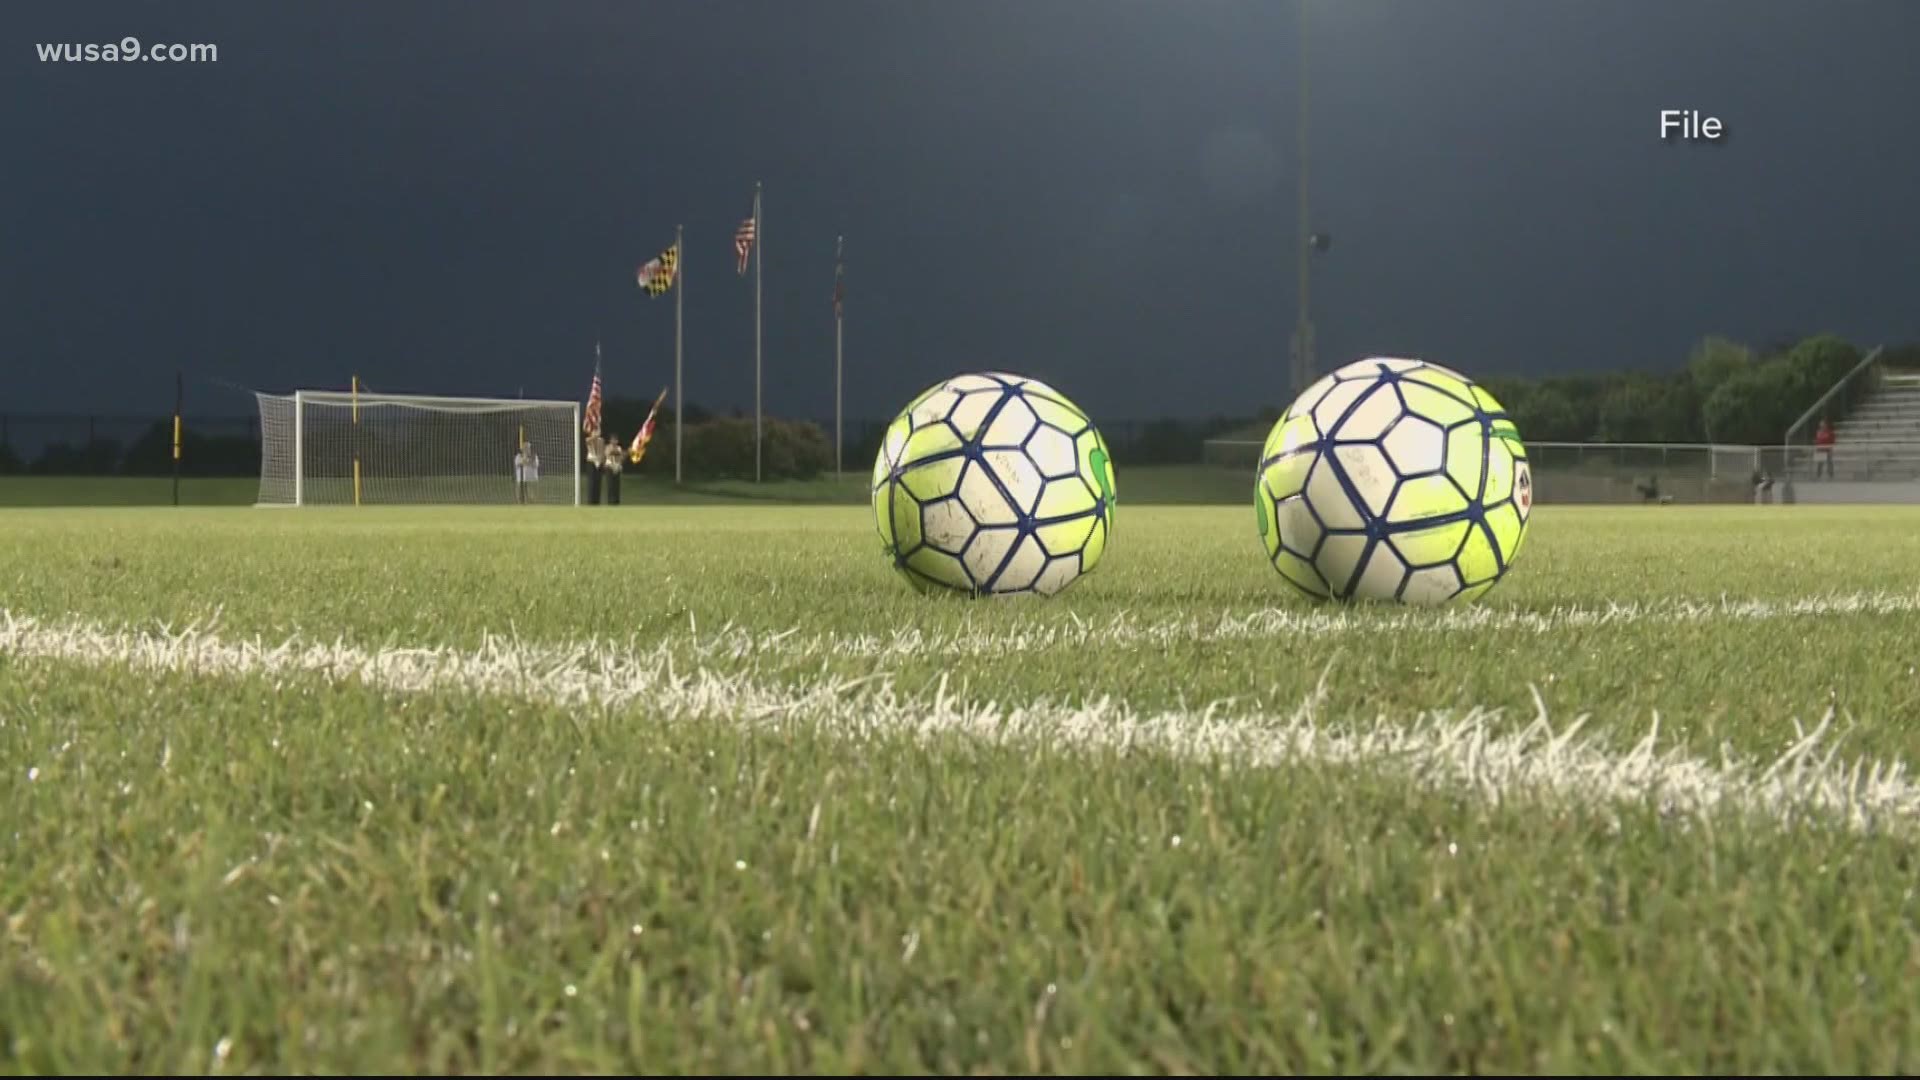 Montgomery County officials rescinded approval for the Bethesda Premier Cup boy's tournament after a player tested positive in the girl's tournament last weekend.